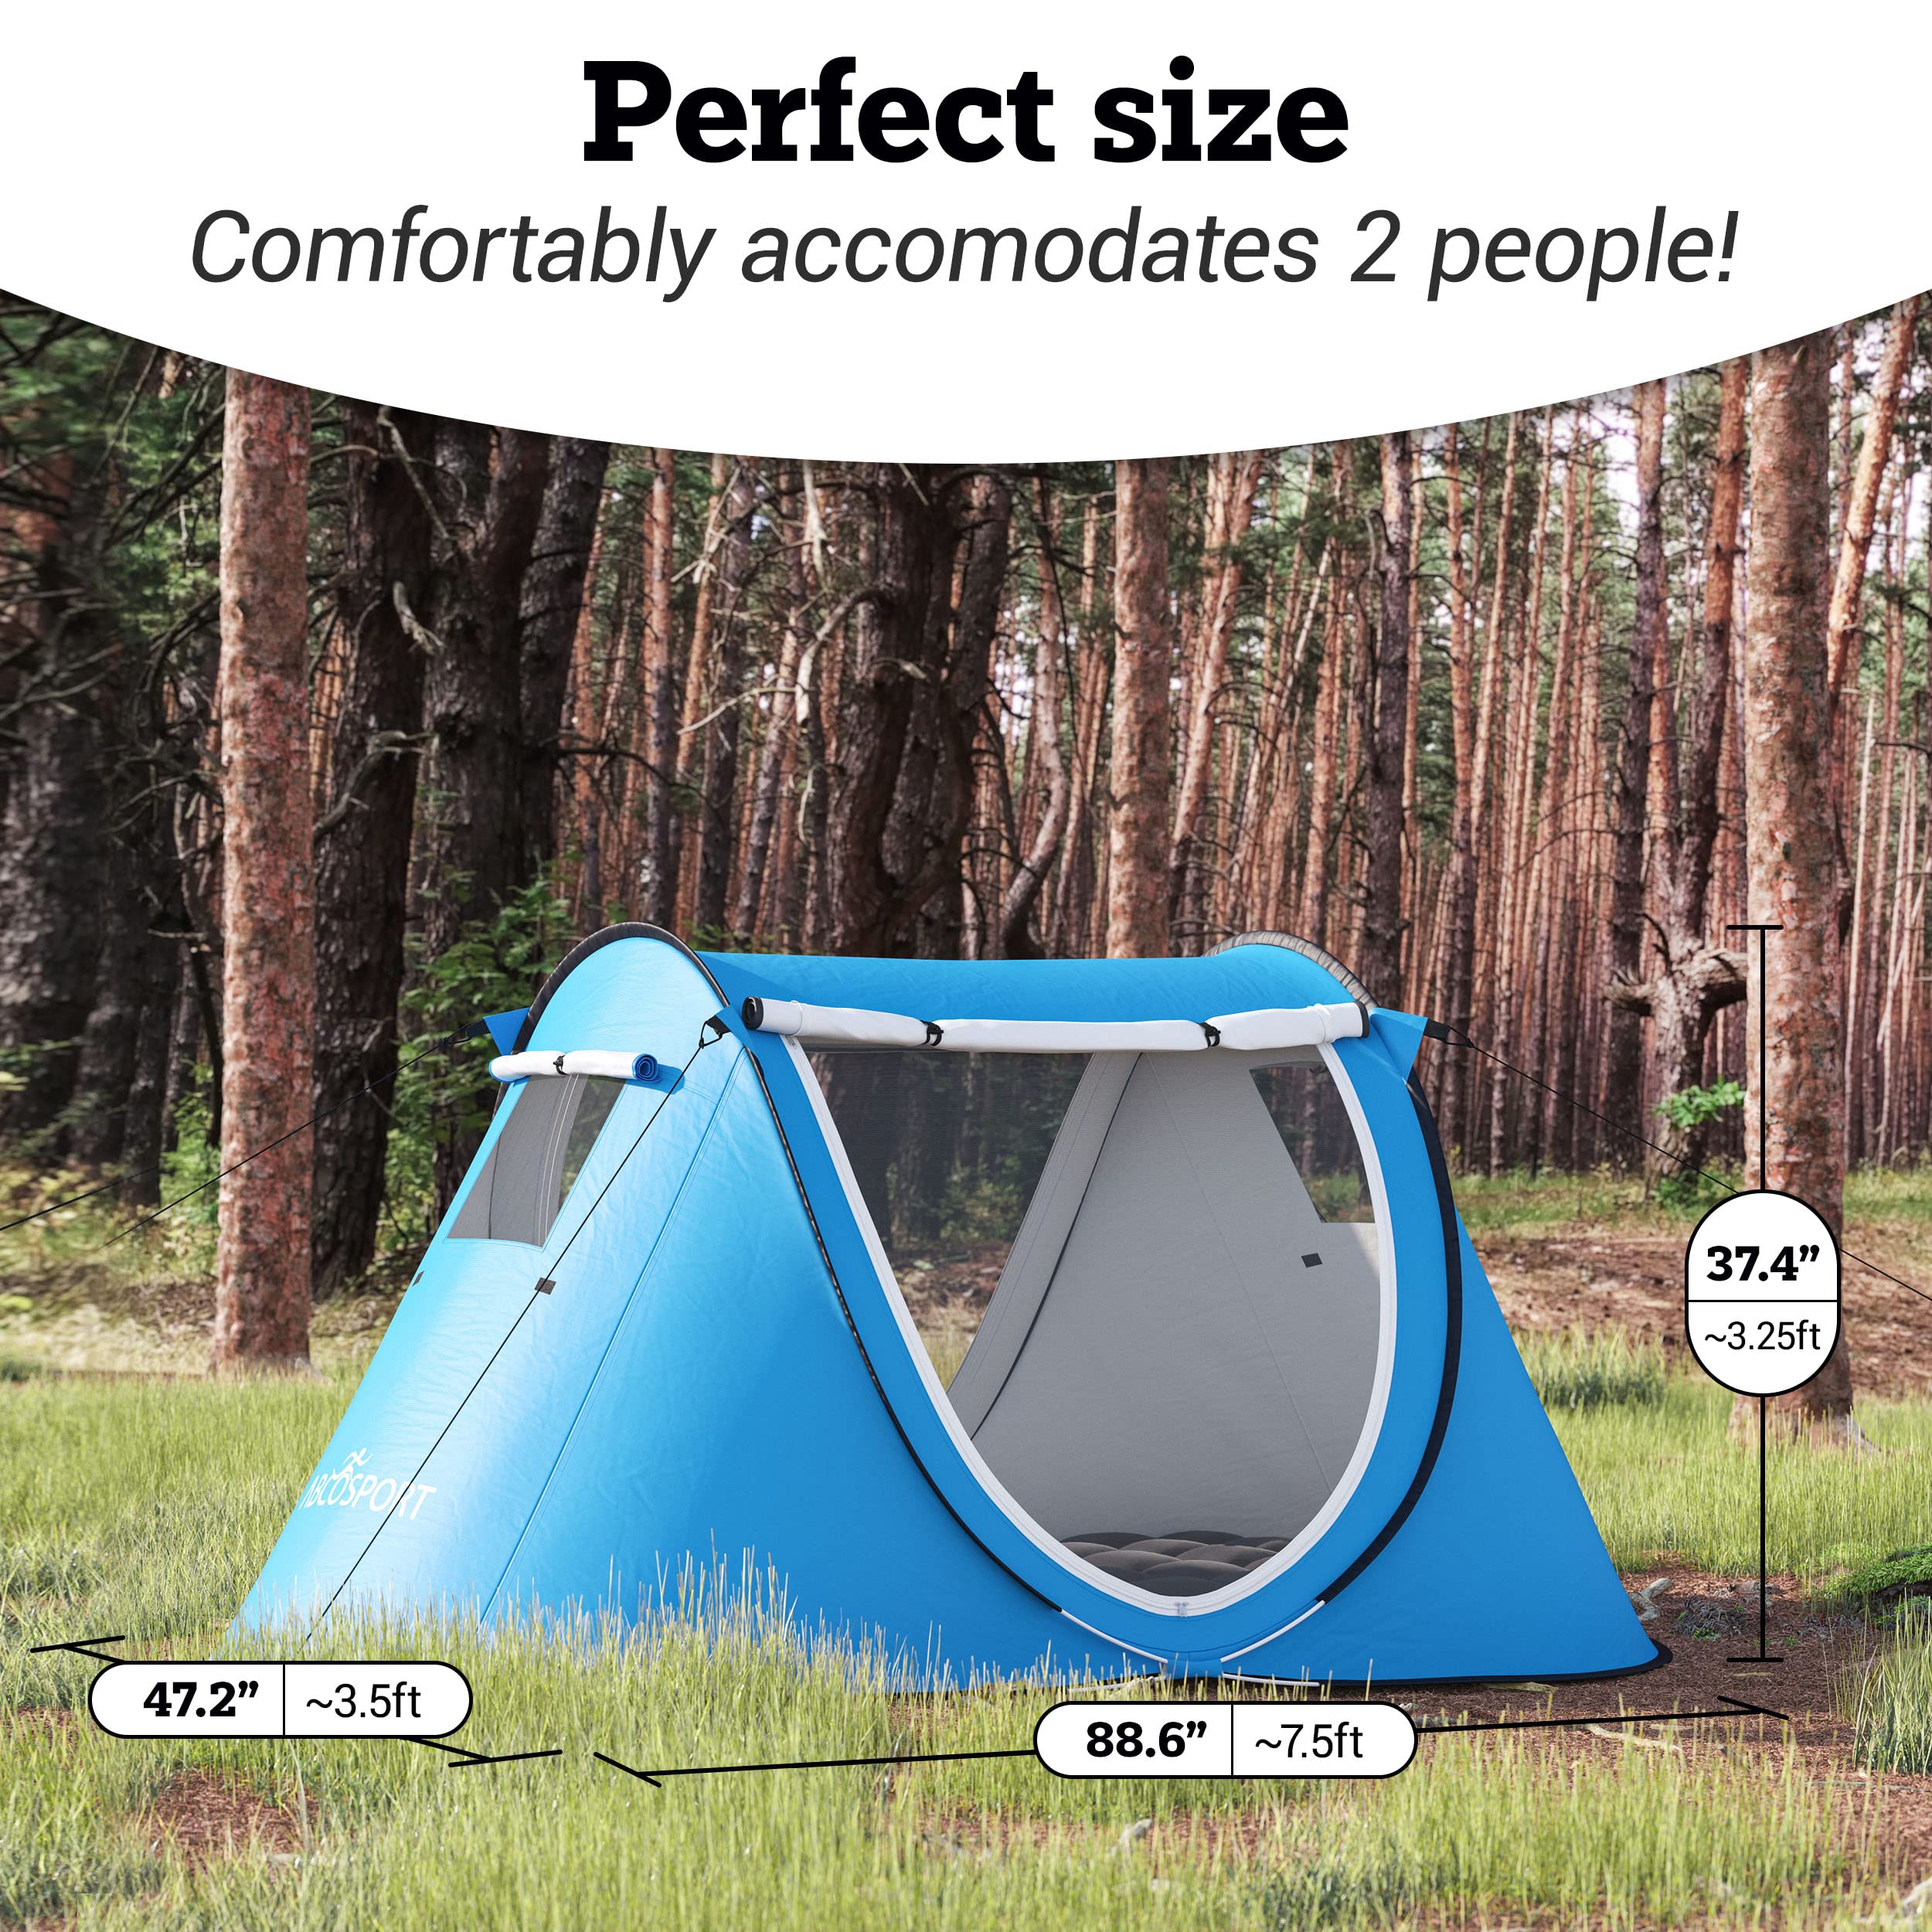 Abco 2-Person Pop Up Tent - Portable Cabana with 2 Doors, Water-Resistant and UV Protection, Carrying Bag - Sky Blue  - Acceptable